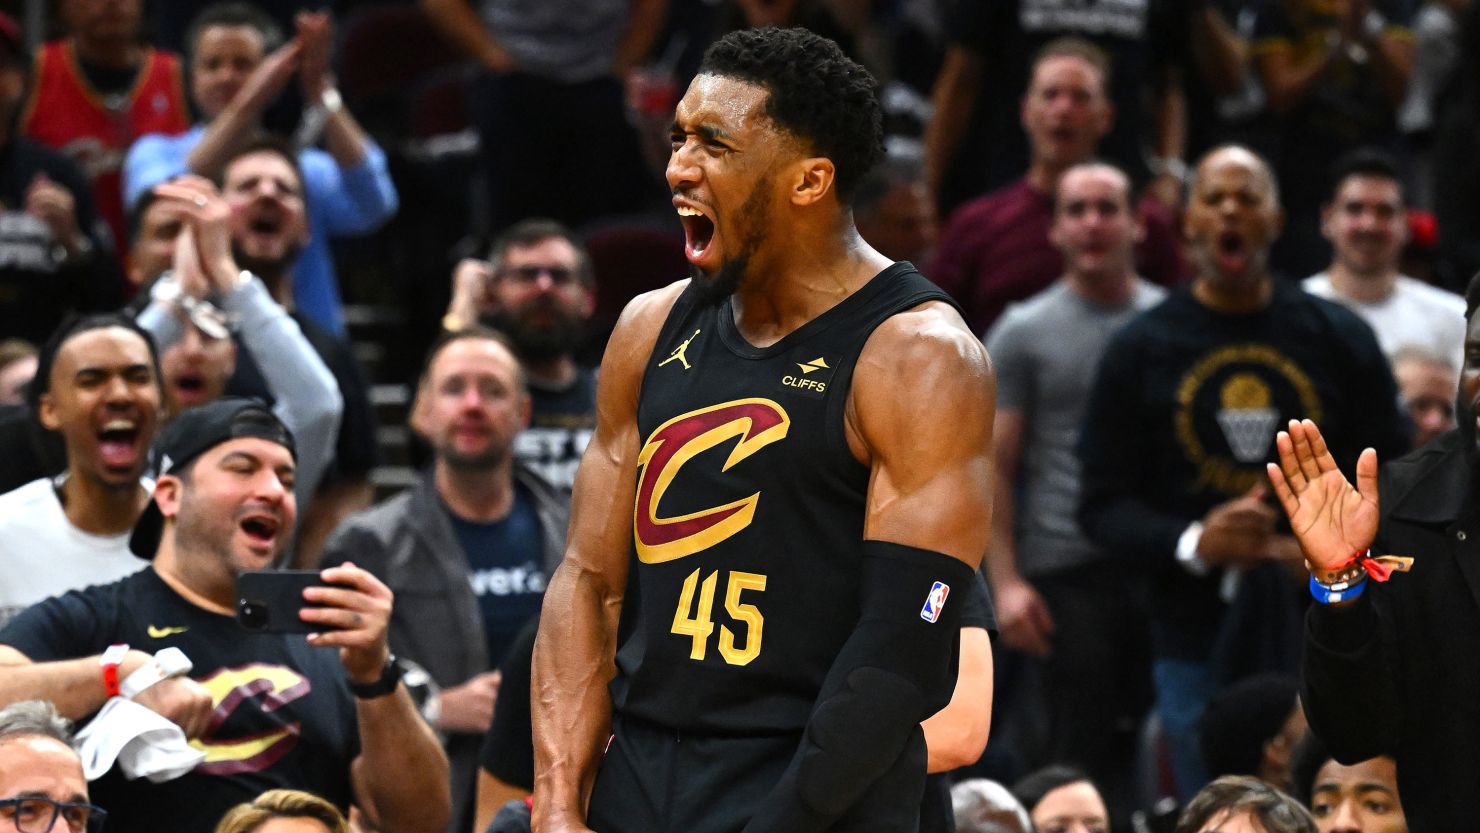 Donovan Mitchell led the Cavaliers' second-half comeback.